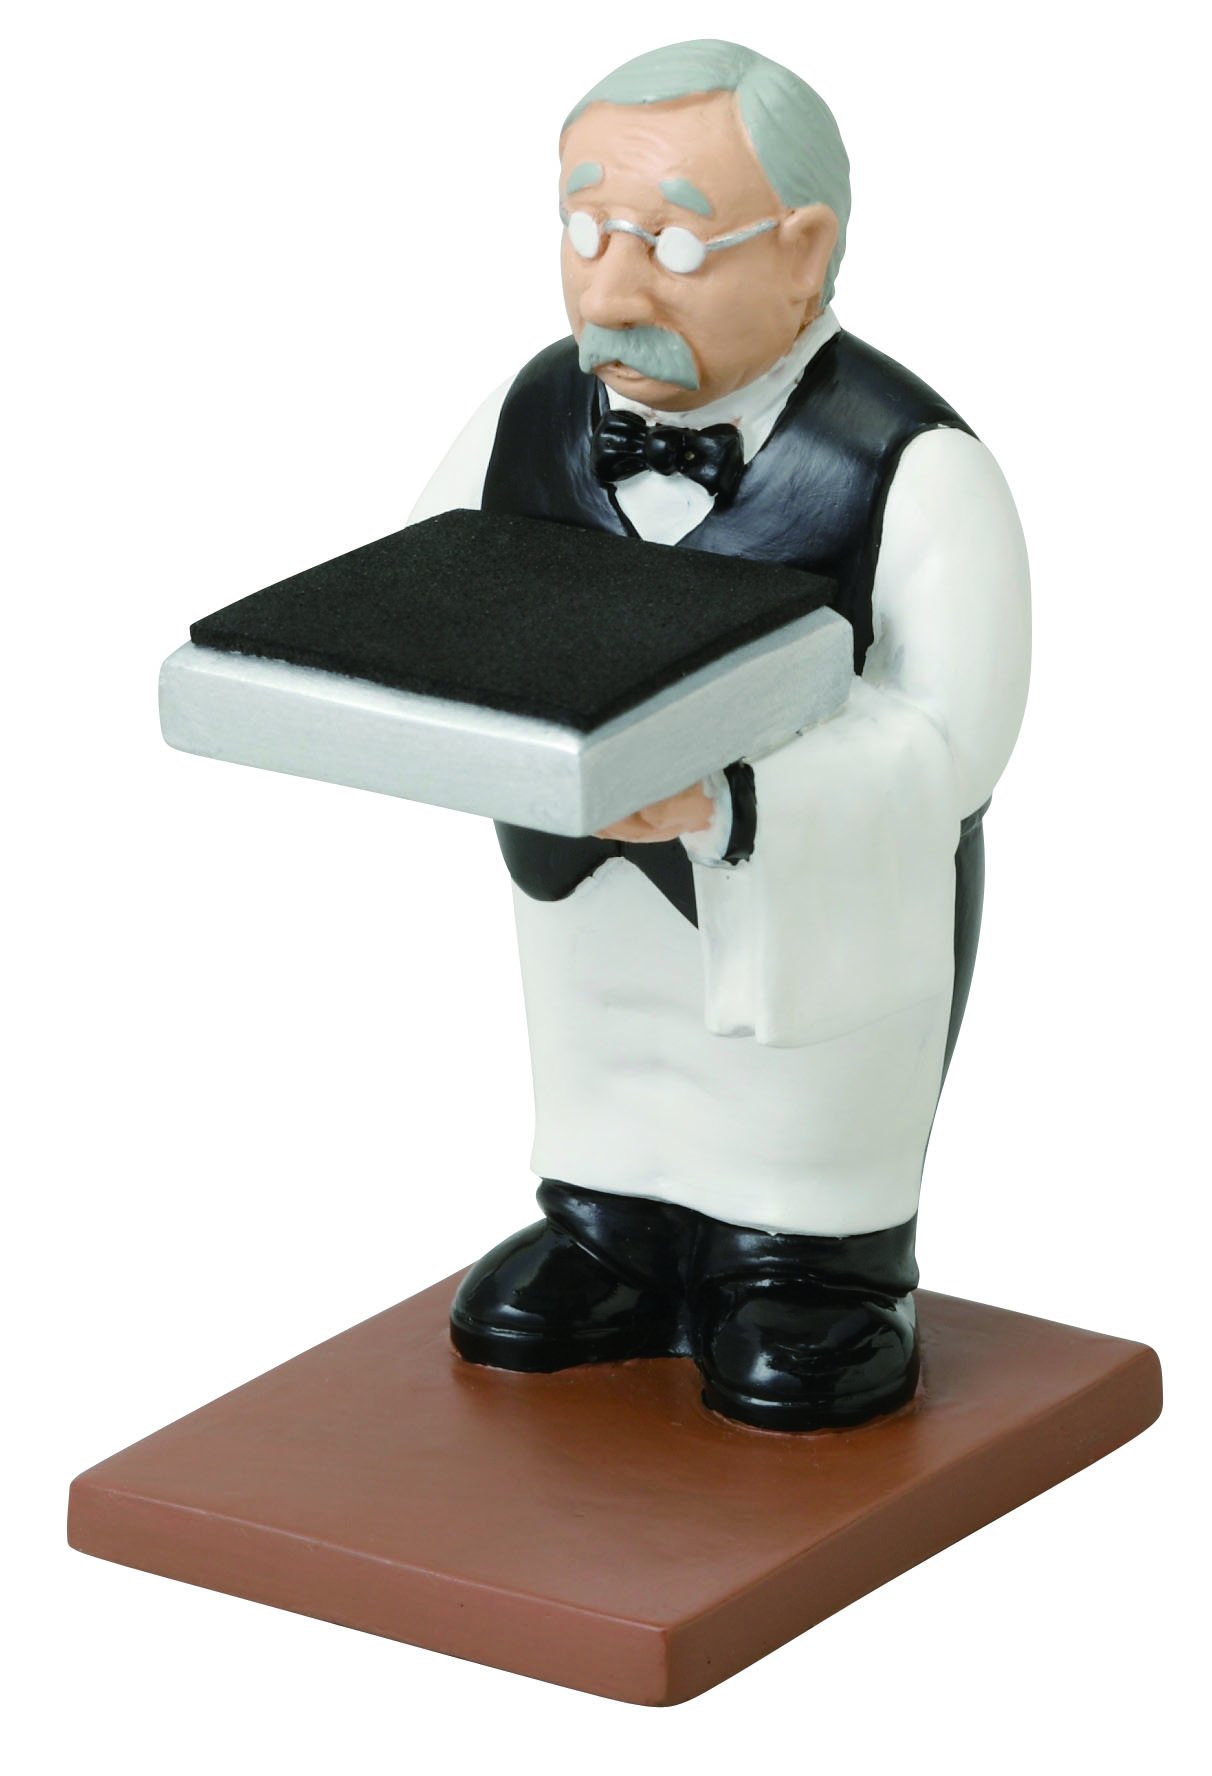 Seto Craft Motif. Watch Stand, Old Man SR-3226-170, Black, Individual Package Size: 3.3 x 3.0 x 5.1 inches (8.3 x 7.6 x 13 cm)